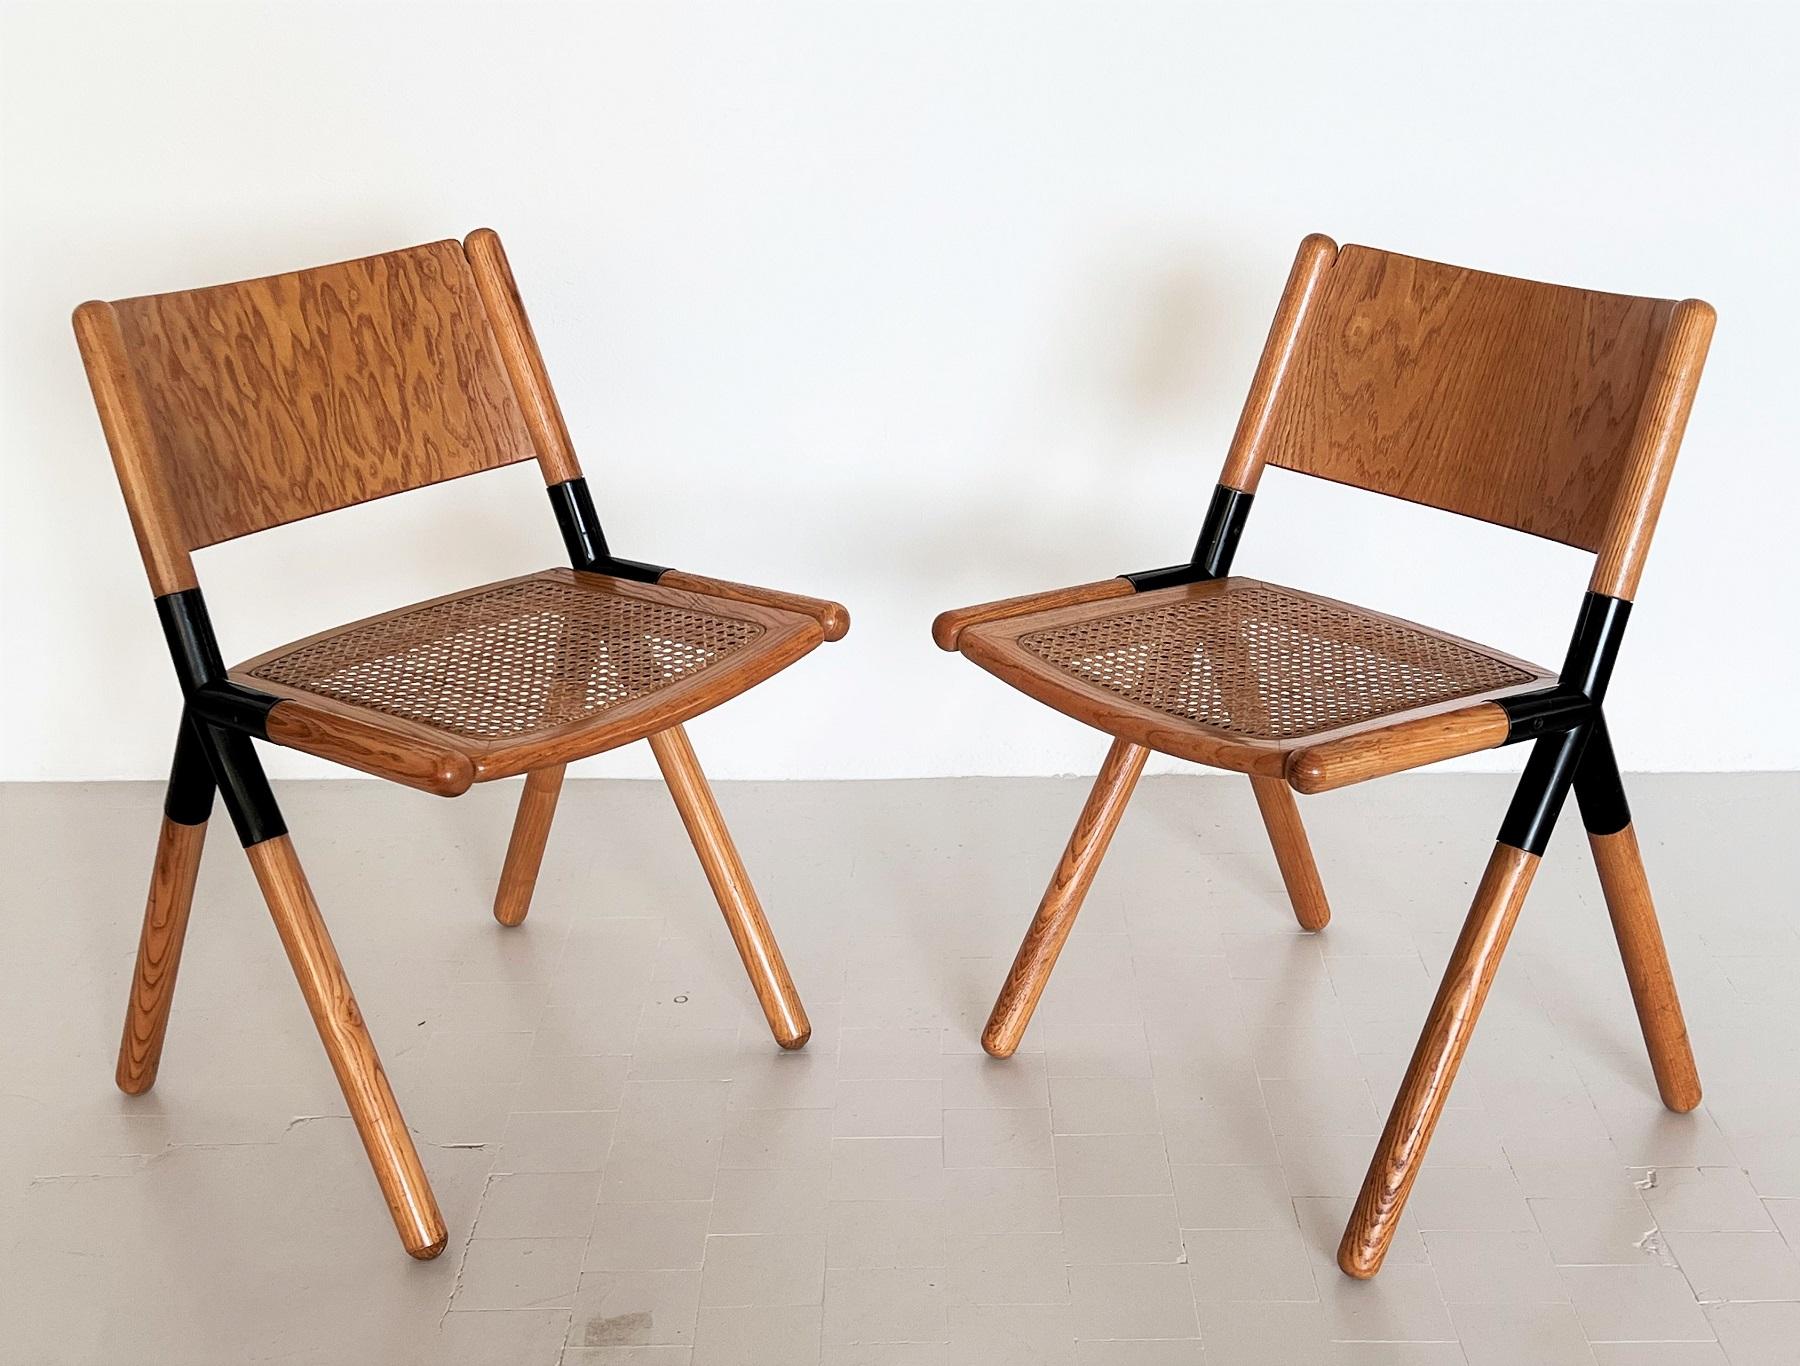 Mid-Century Modern Italian Midcentury Chairs in Oak and Rattan by Mauro Pasquinelli, 1975 For Sale